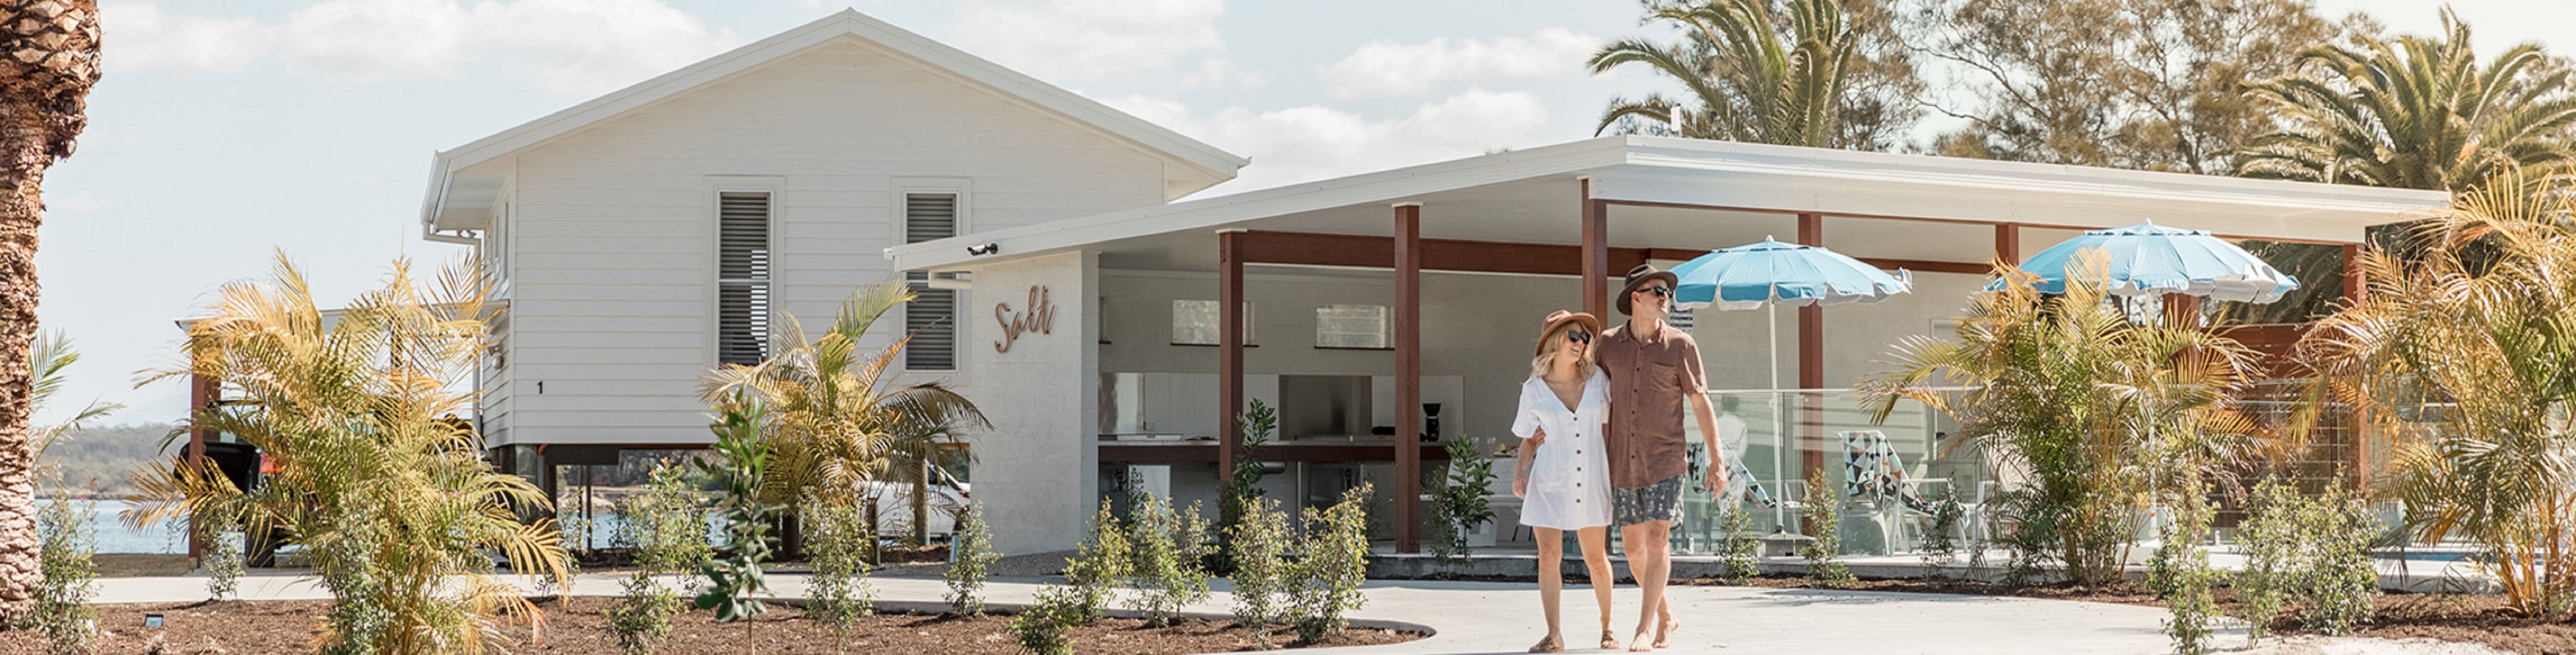 Salt at South West Rocks - Accommodation Directory